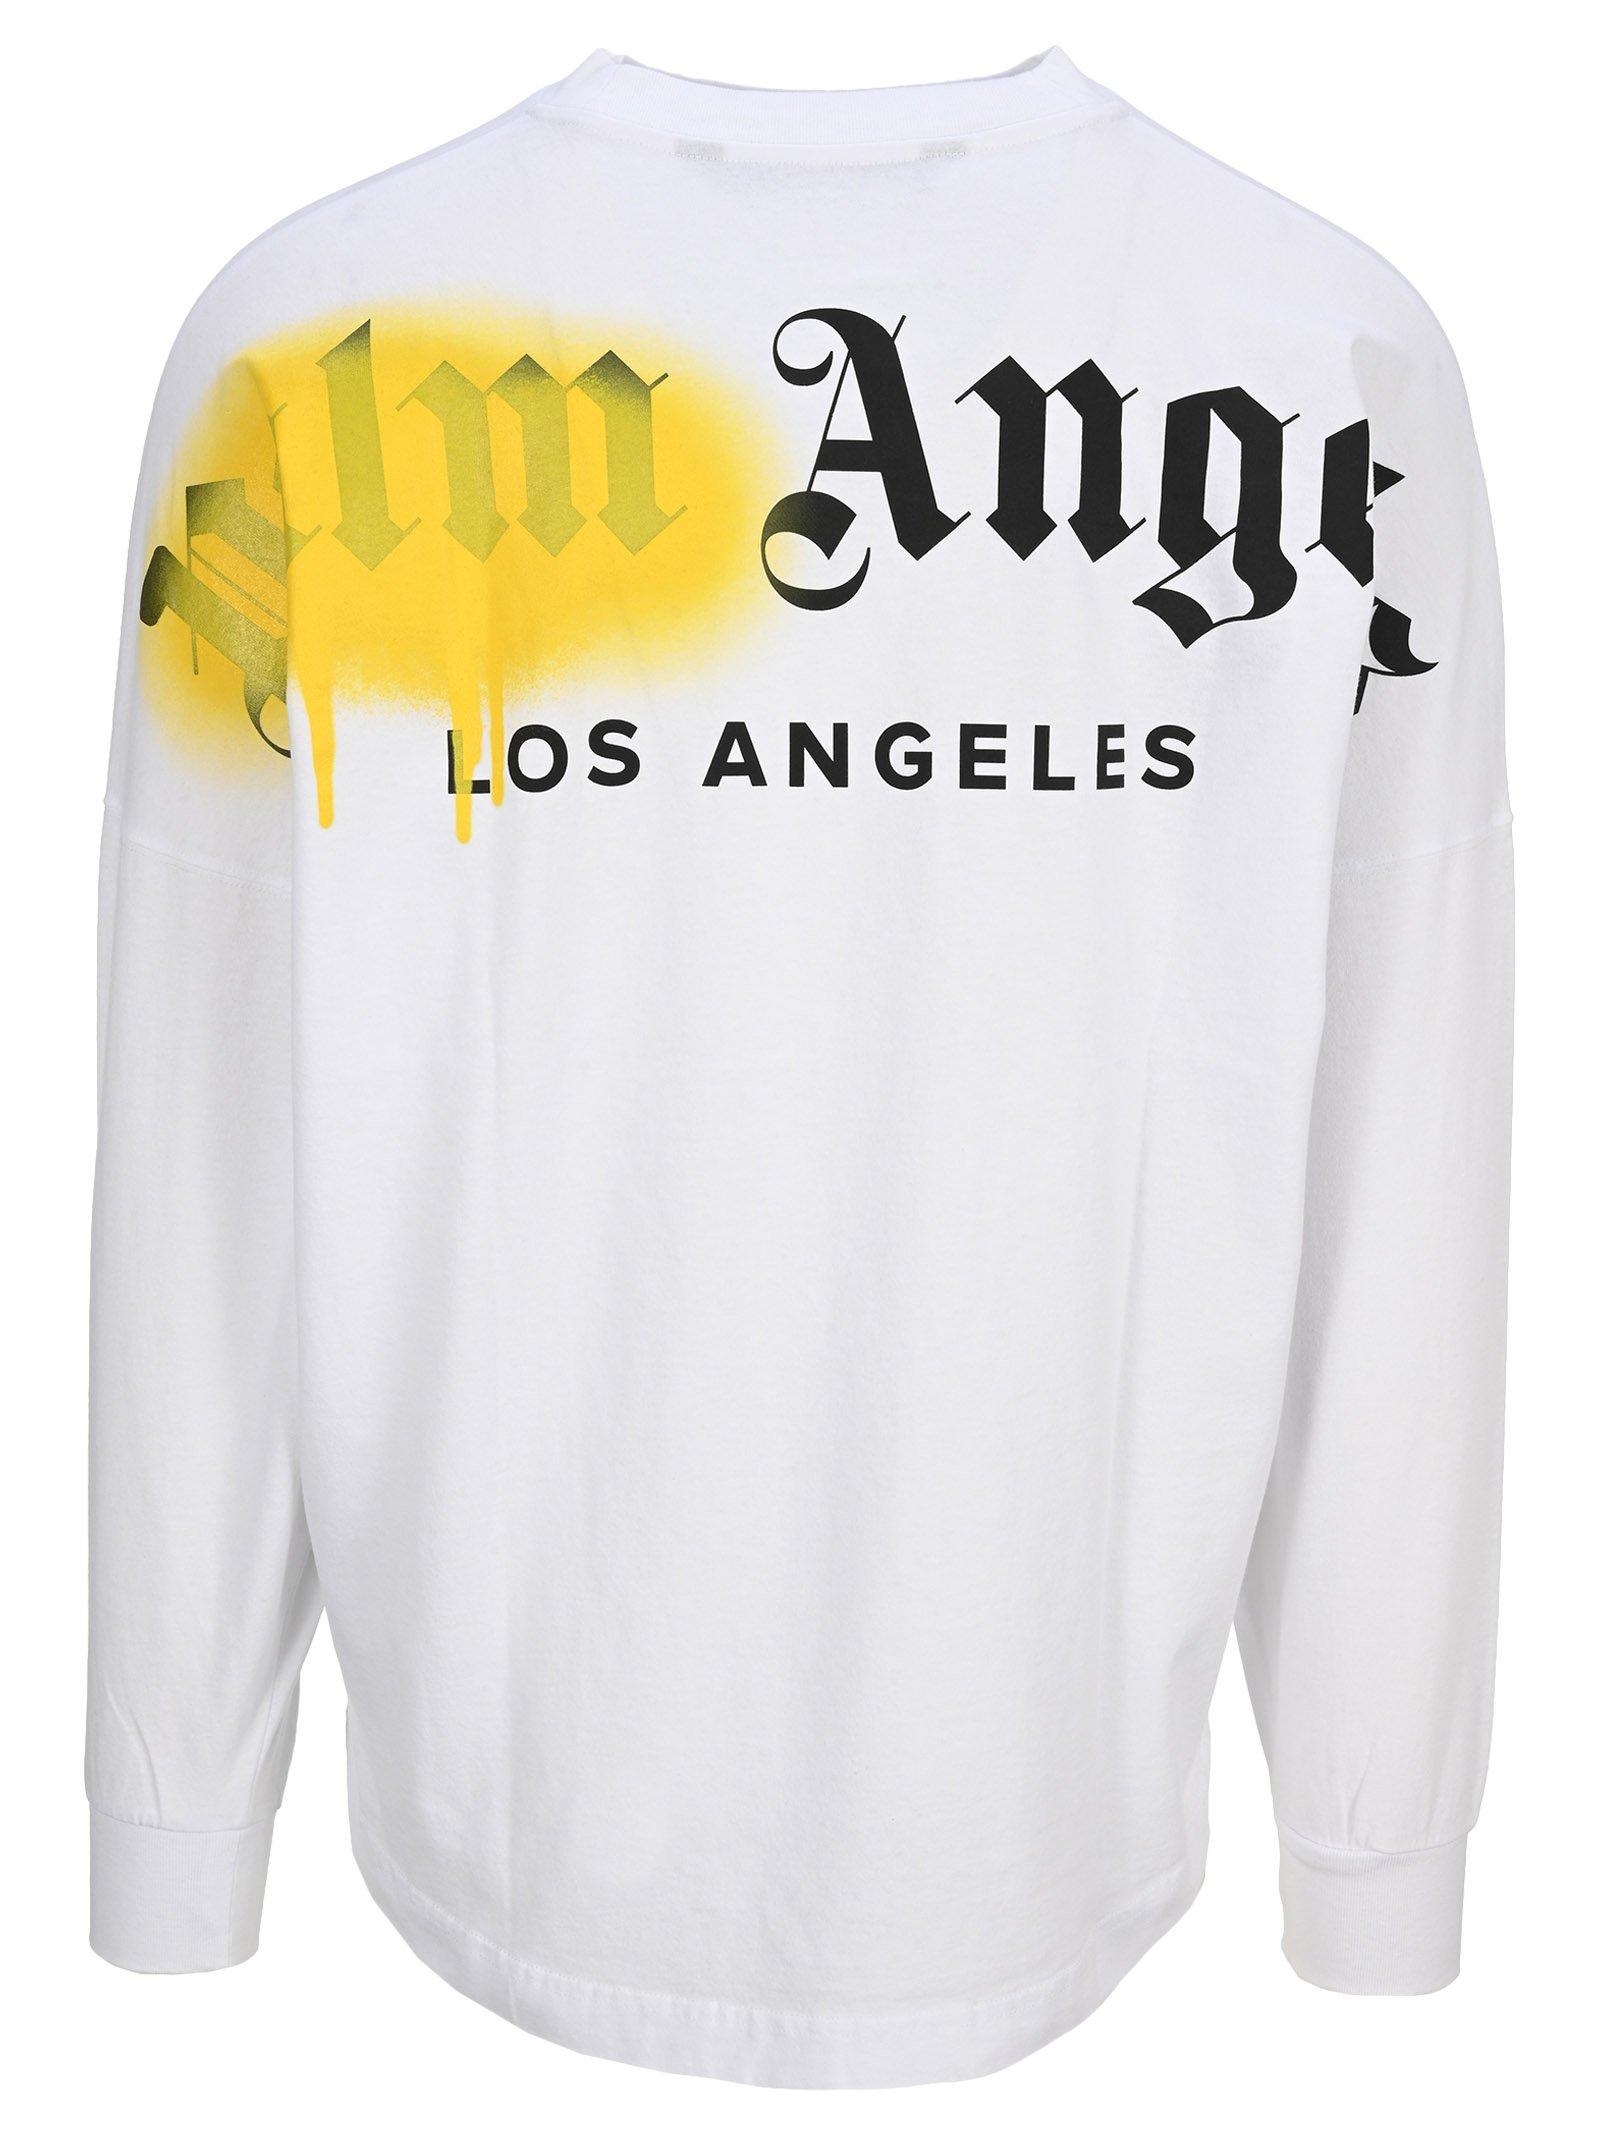 Palm Angels White Printed Cotton Crew Neck Full Sleeve T-shirt L Palm Angels